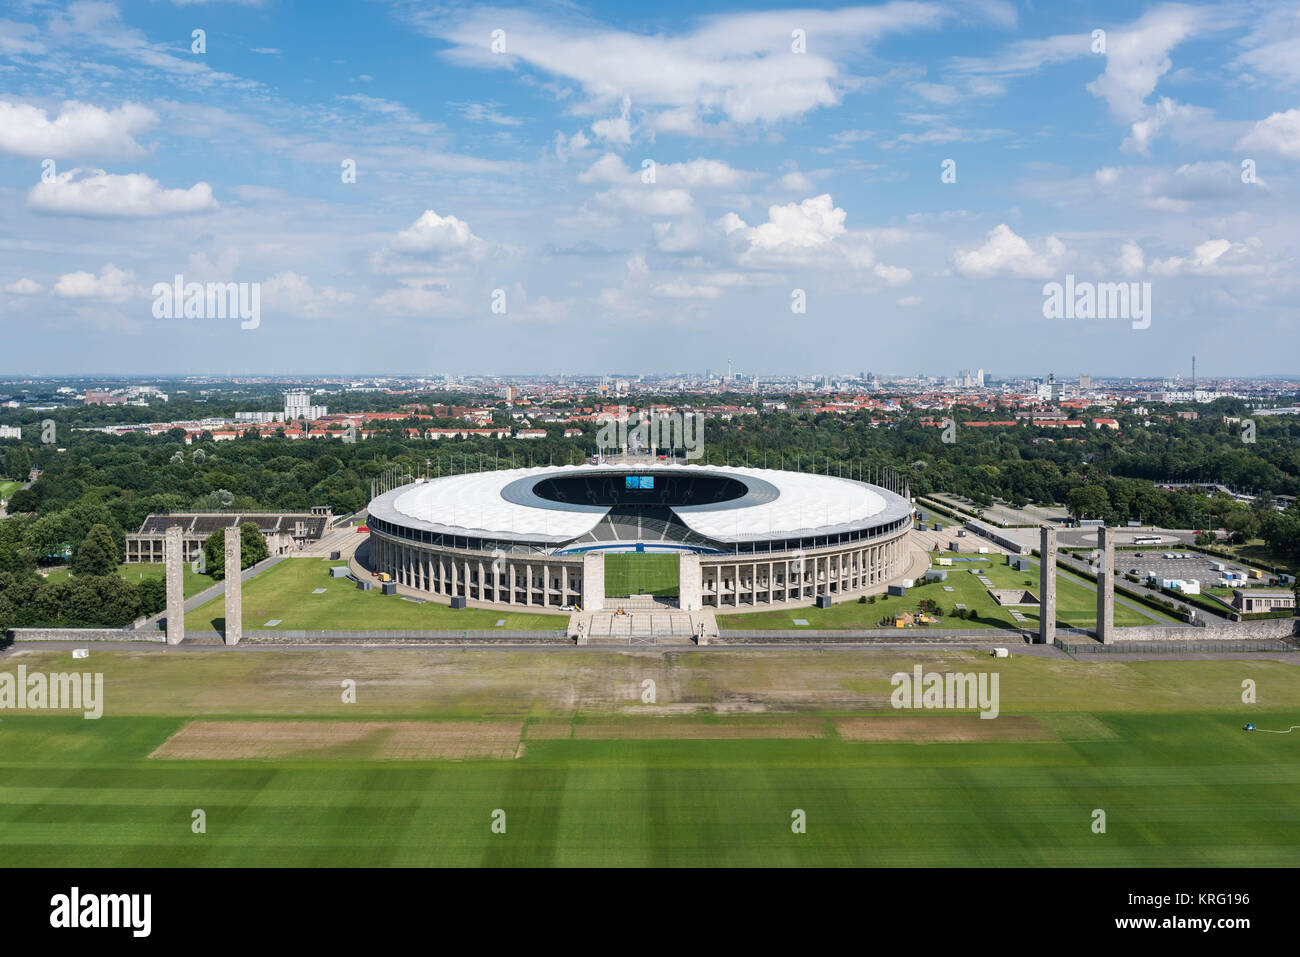 Berlin. Germany. Olympic Stadium (Olympiastadion), originally designed by Werner March (1894-1976) for the 1936 Summer Olympics. Stock Photo